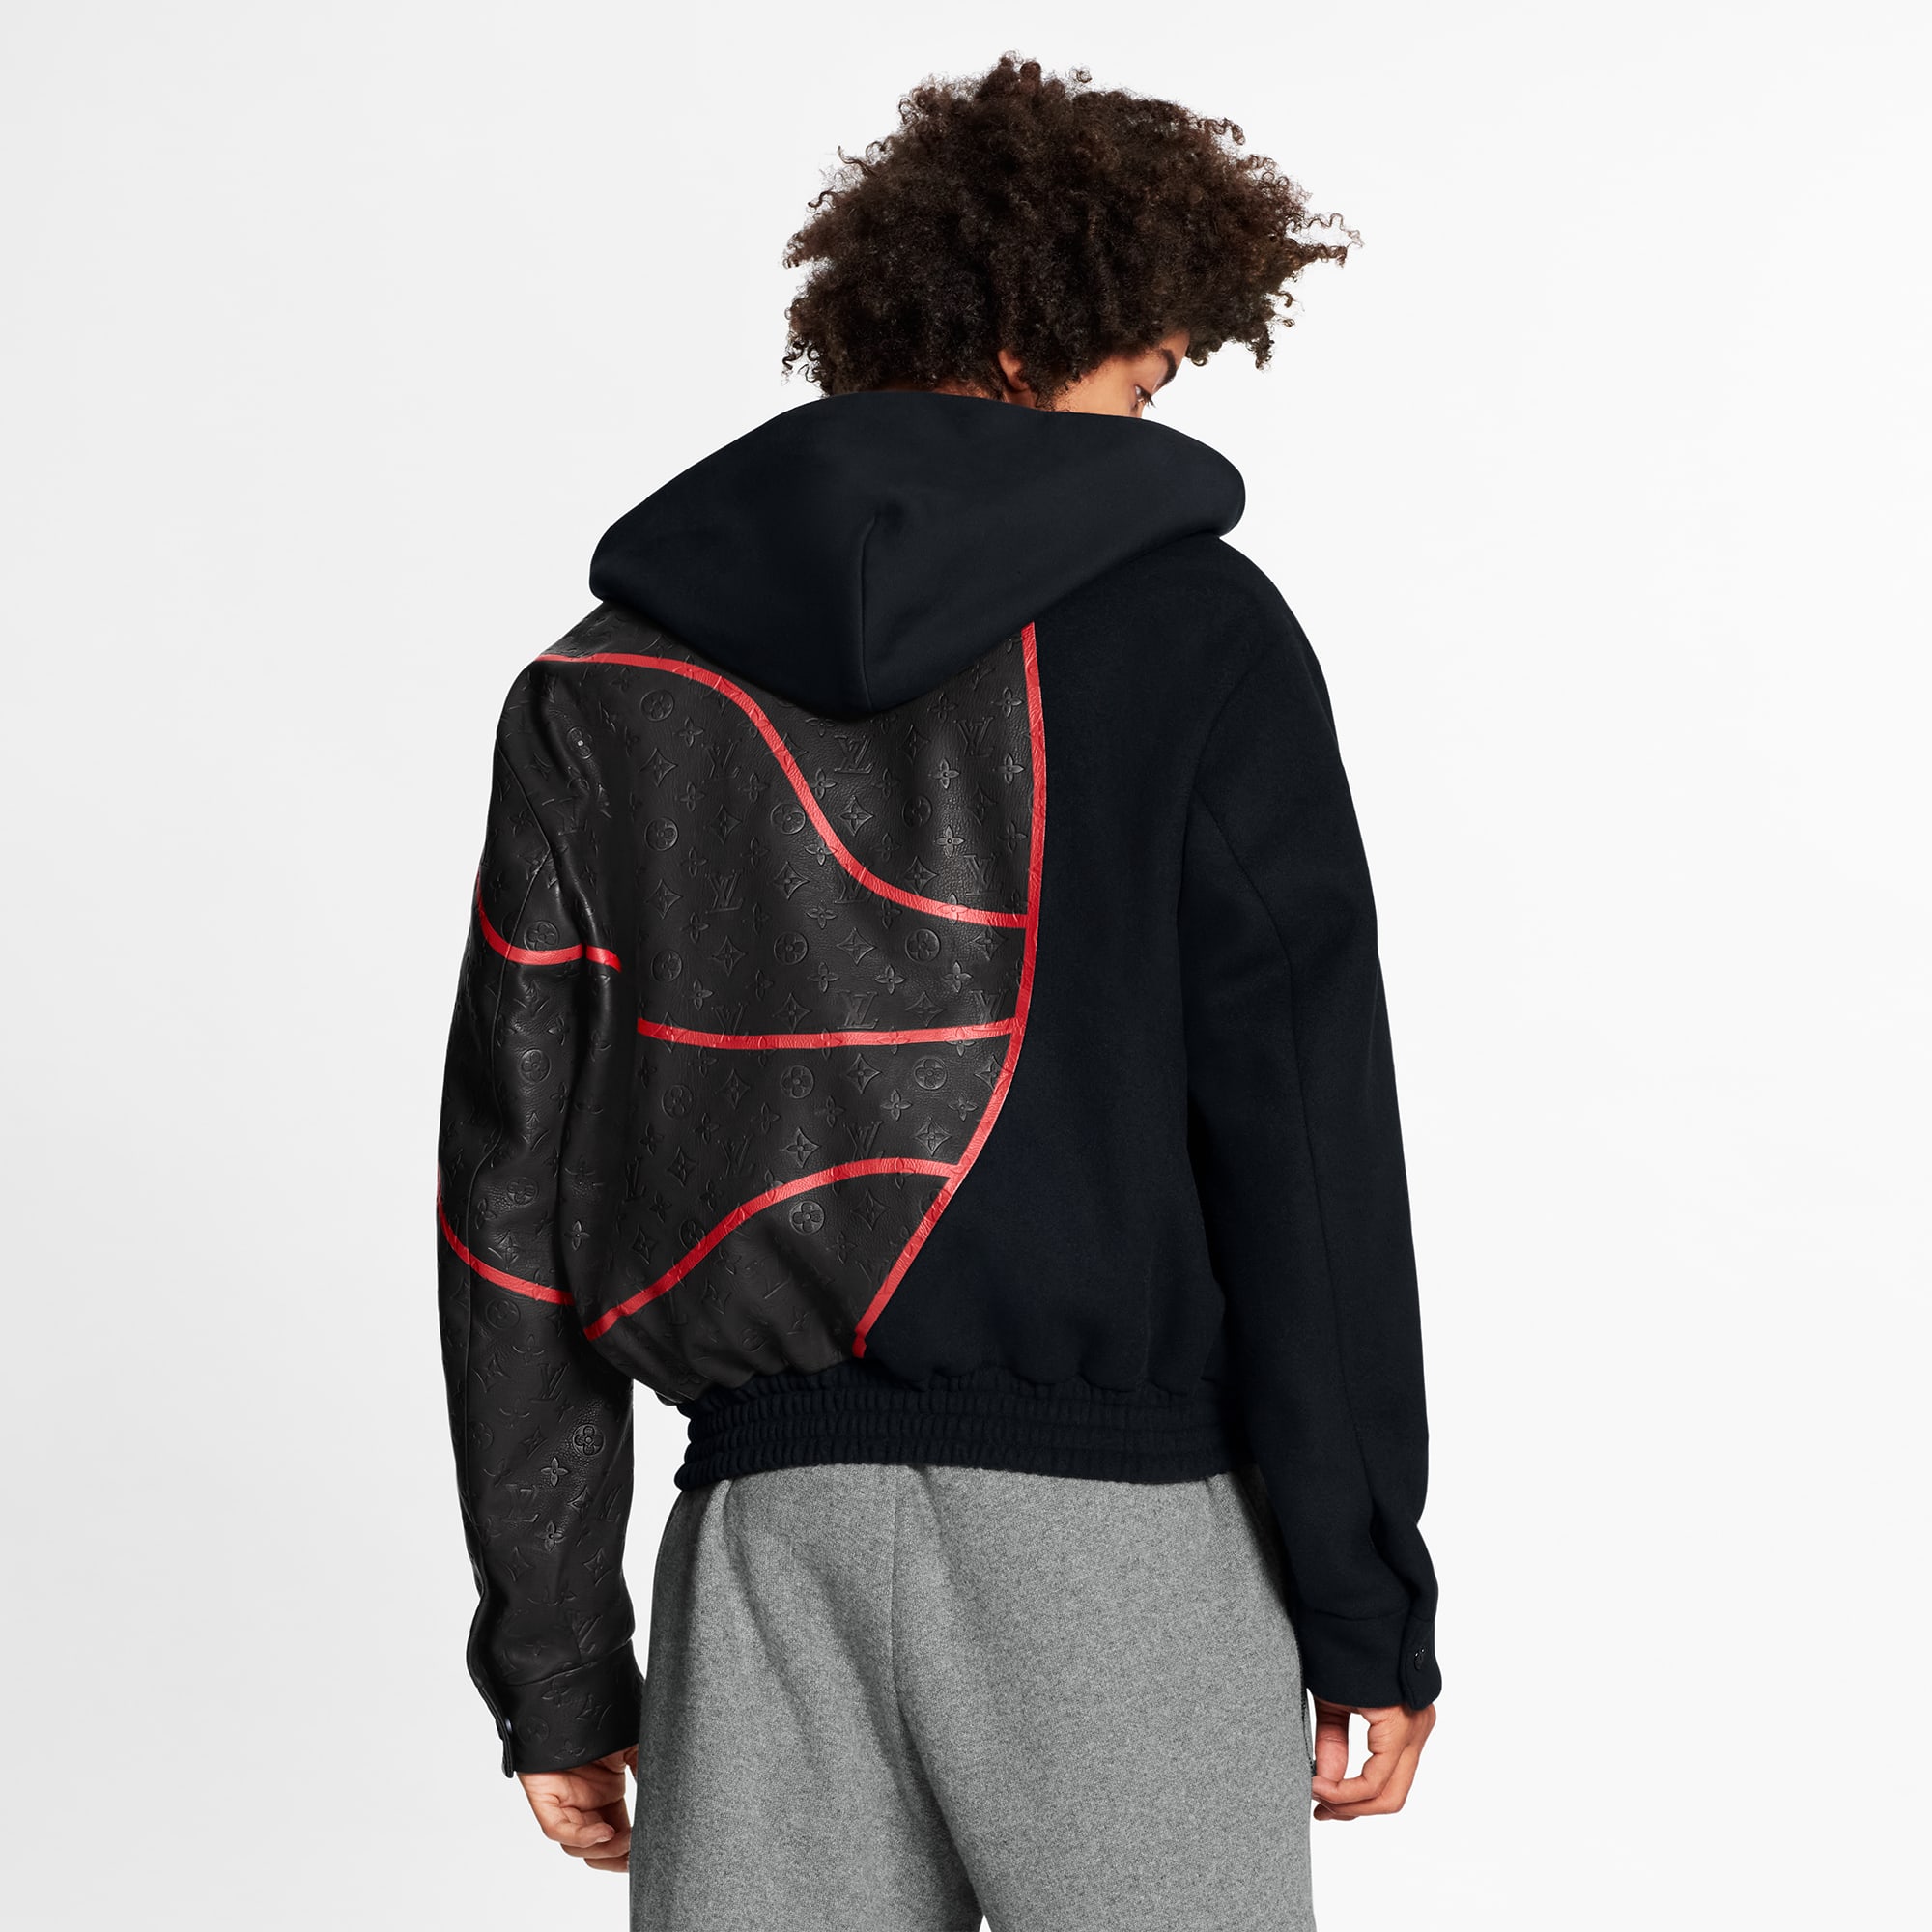 Louis Vuitton - Introducing #LVxNBA. The first menswear capsule collection  of Louis Vuitton's partnership with the NBA was designed by Virgil Abloh.  Discover the line of basketball-inspired clothing, bags, and shoes at